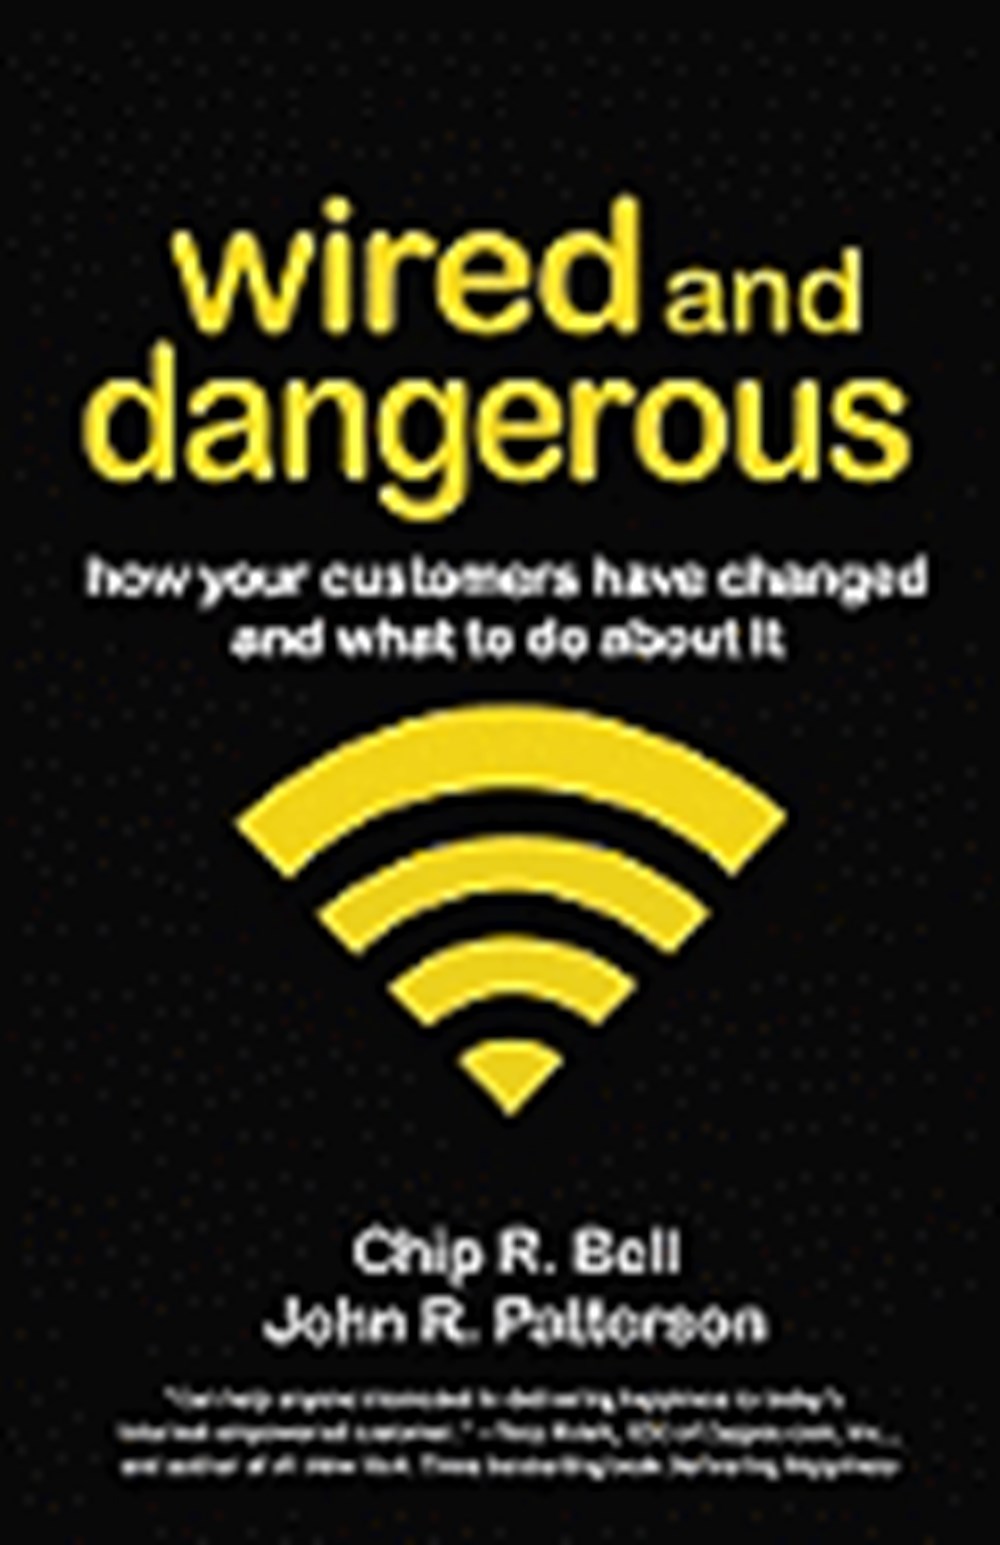 Wired and Dangerous: How Your Customers Have Changed and What to Do about It